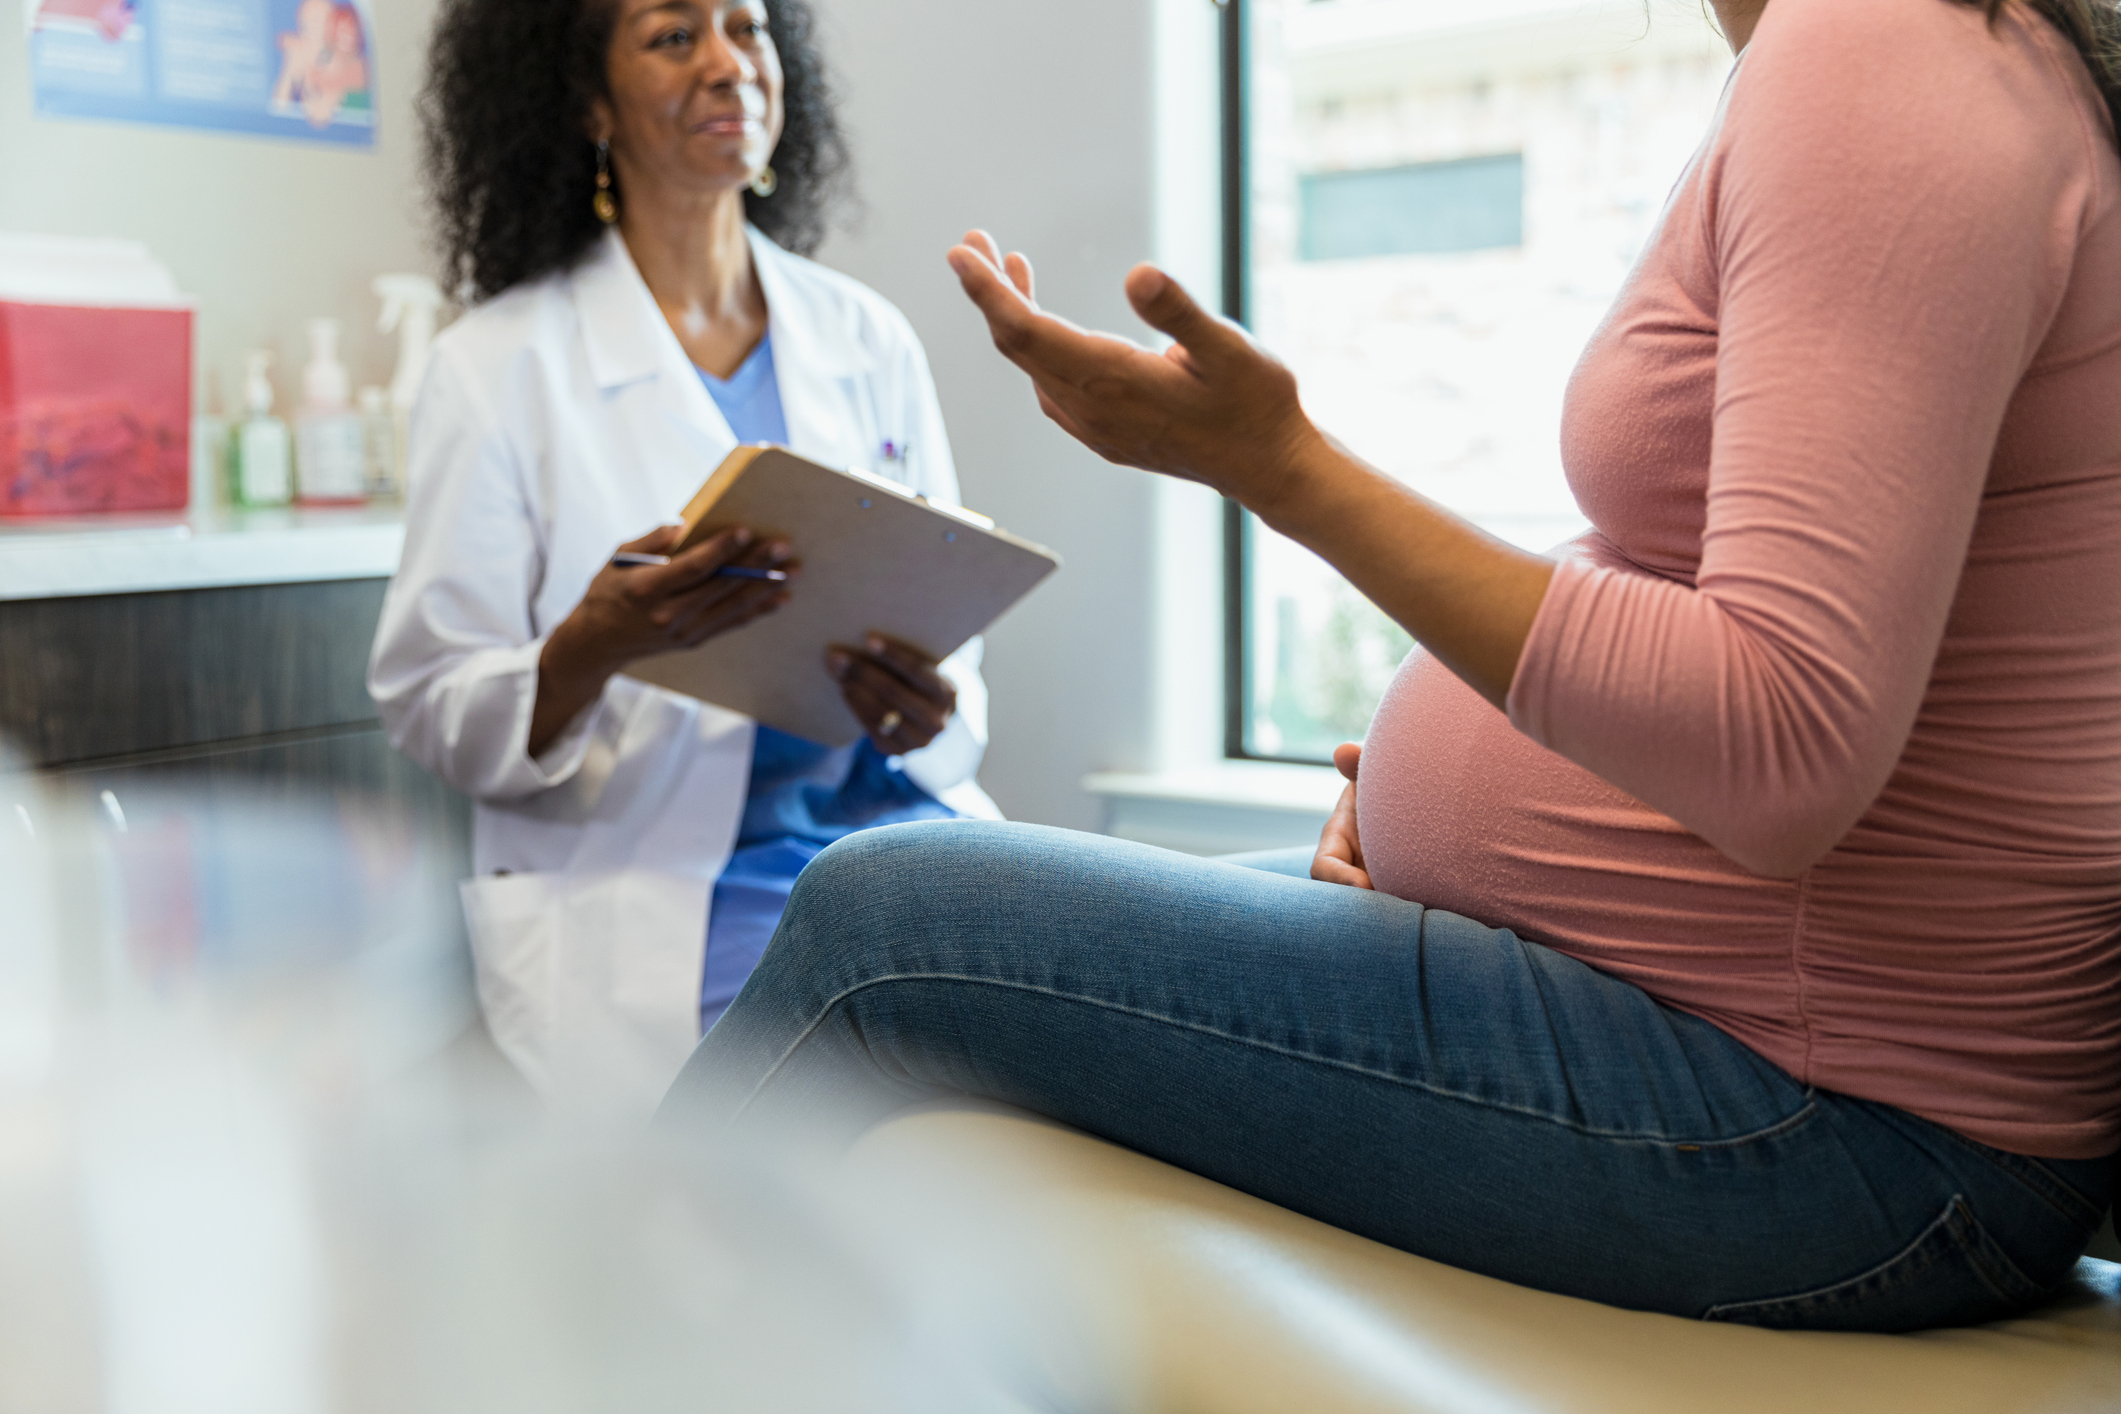 Why Women of Color Lack Access to Adequate Health Care